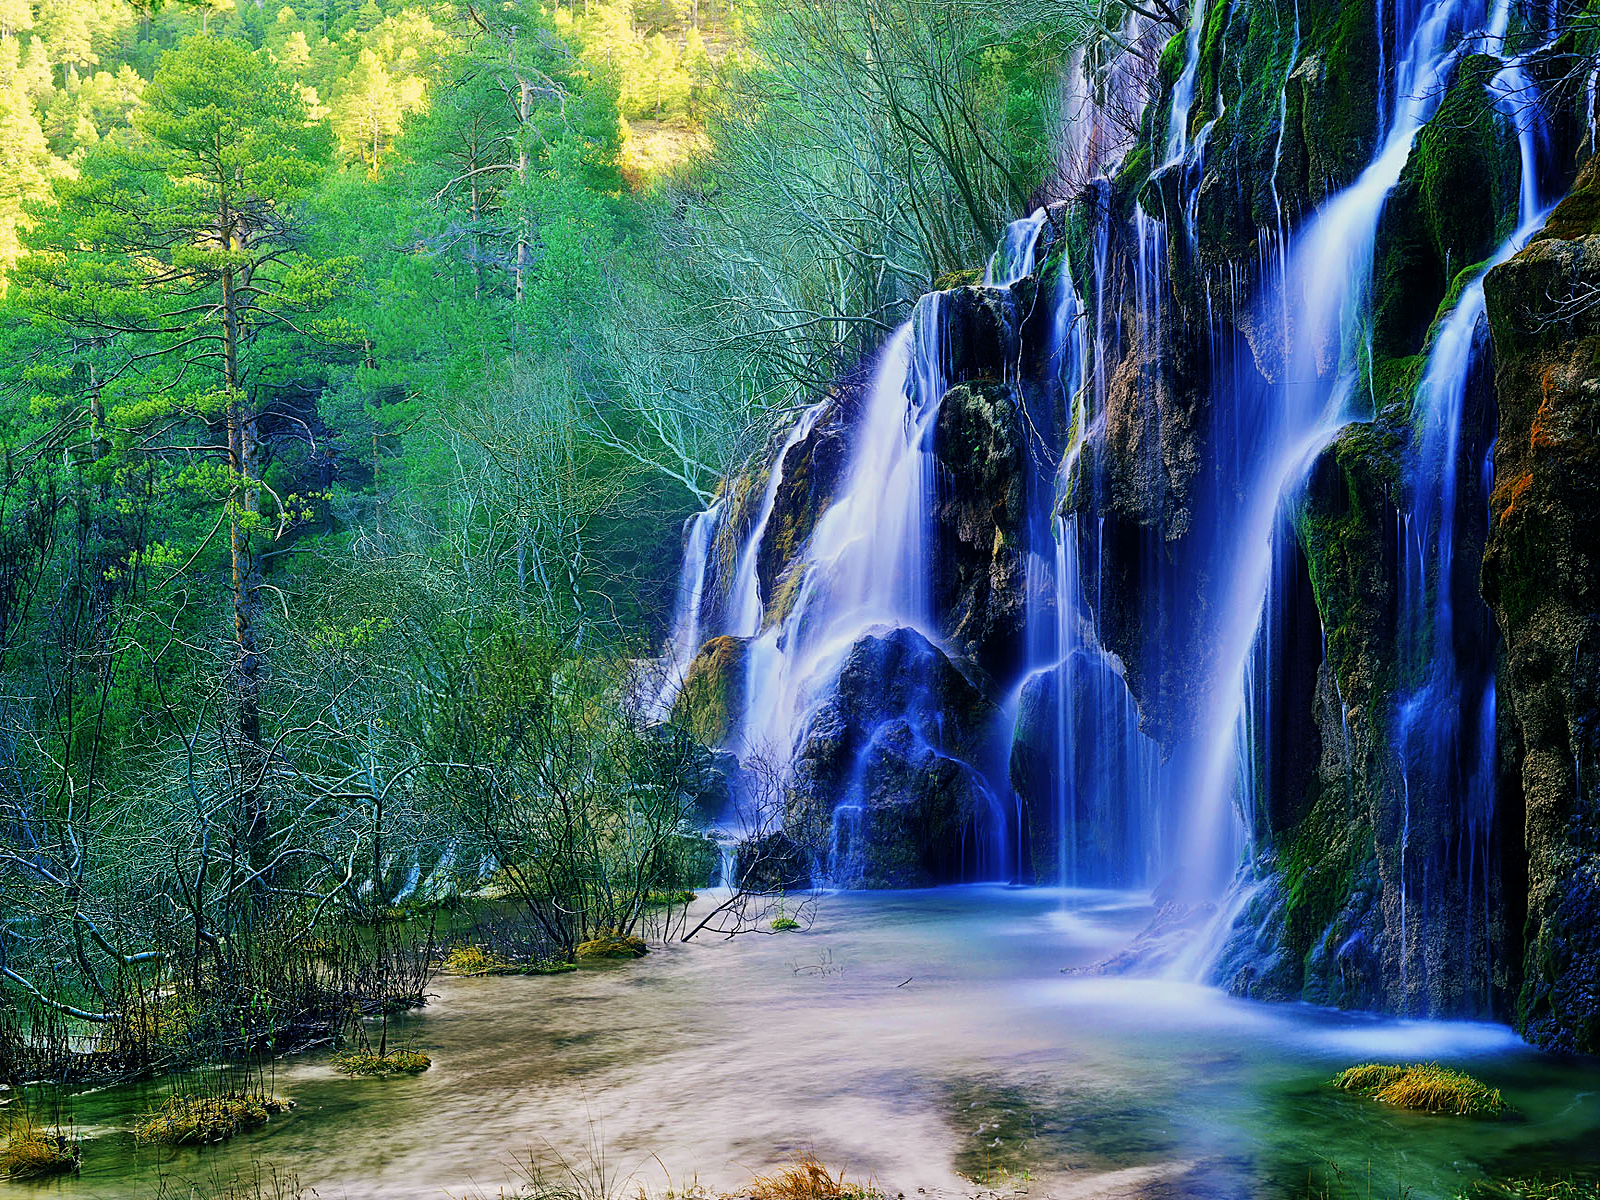 Live Waterfall Wallpaper For Windows 7